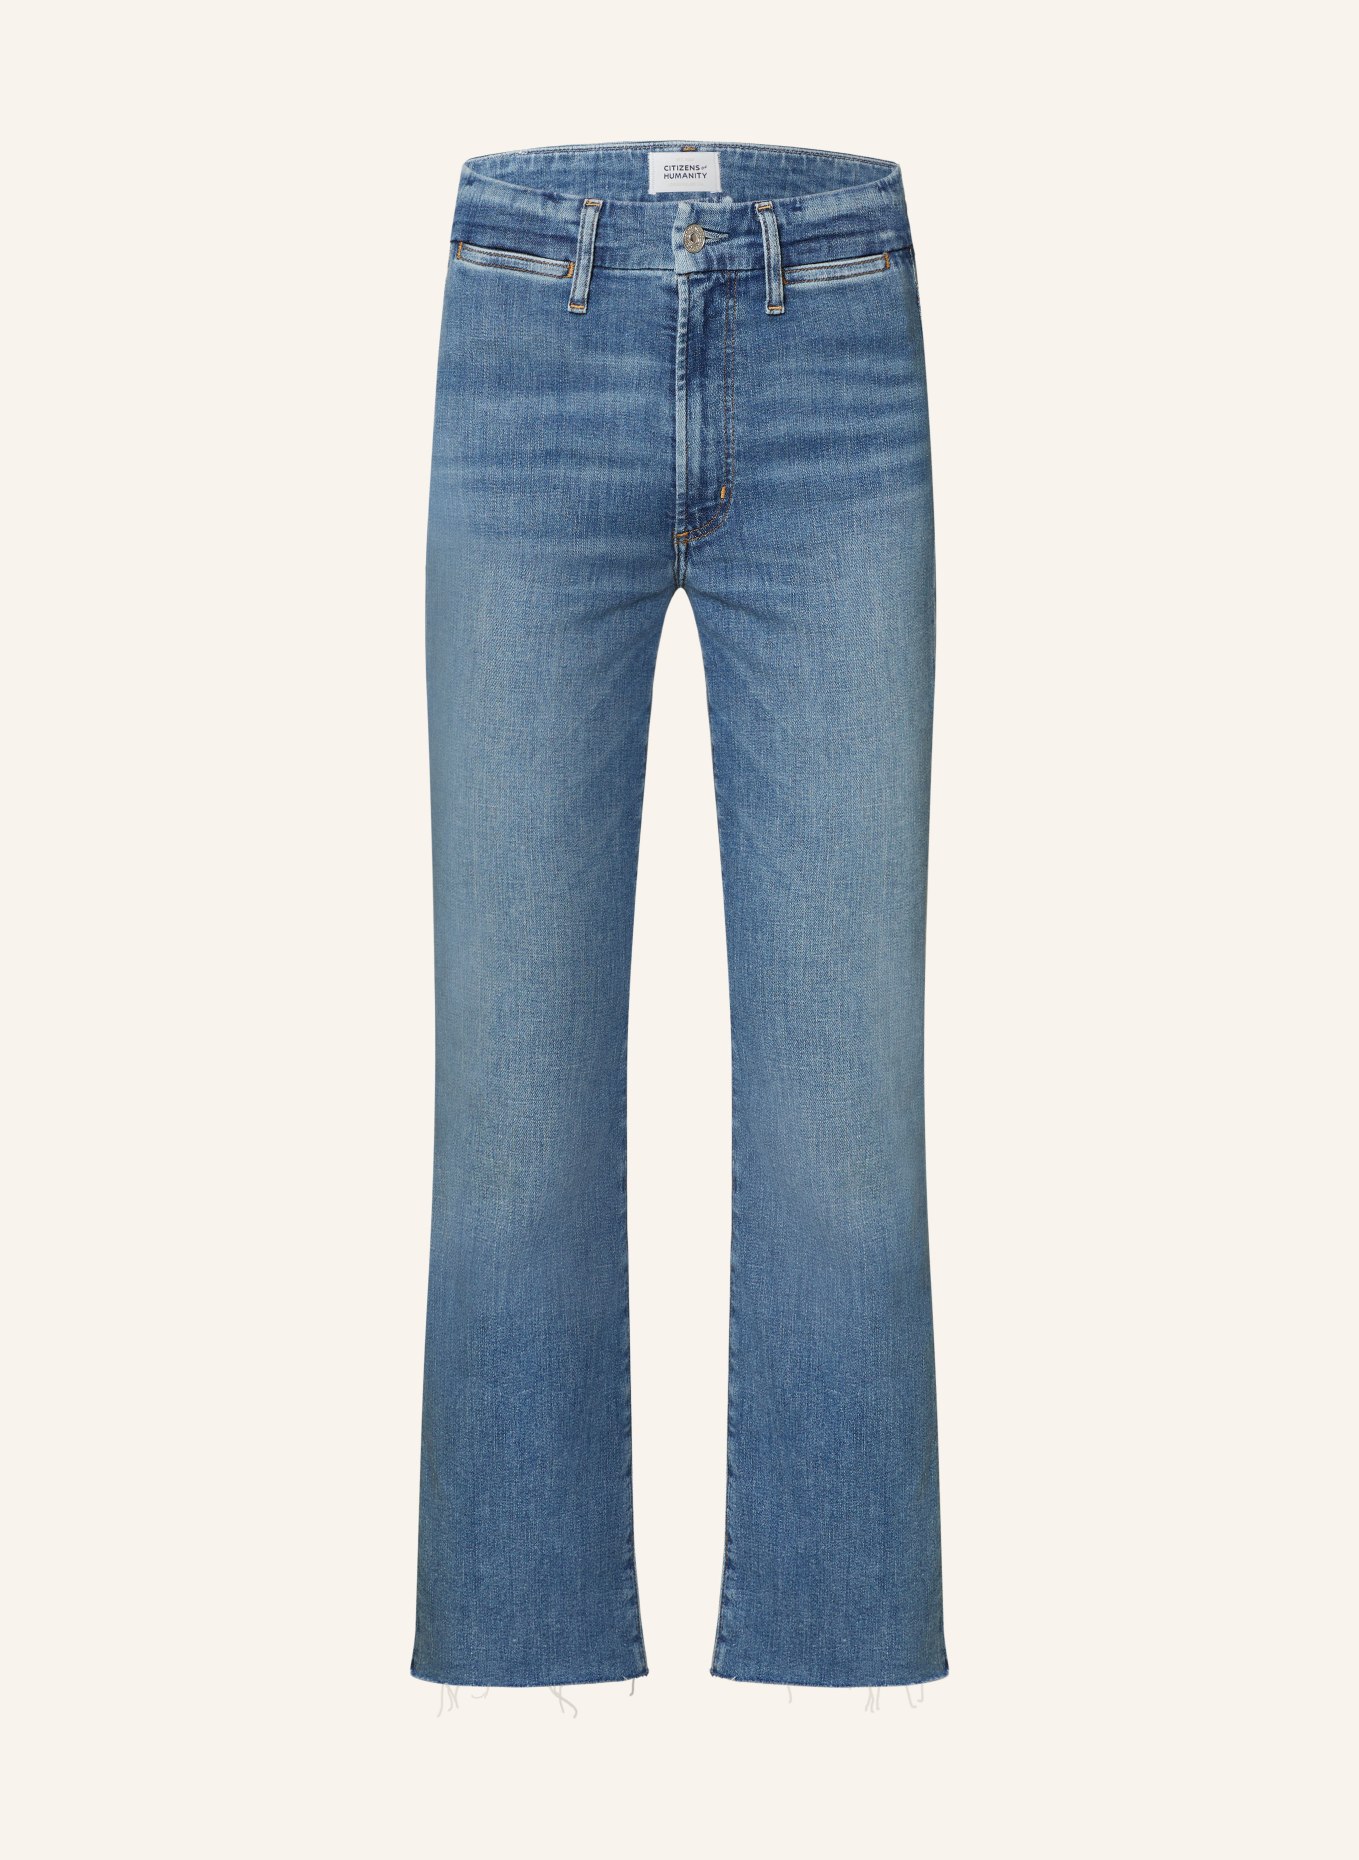 CITIZENS of HUMANITY 7/8 jeans ISOLA, Color: Abliss md indigo (Image 1)